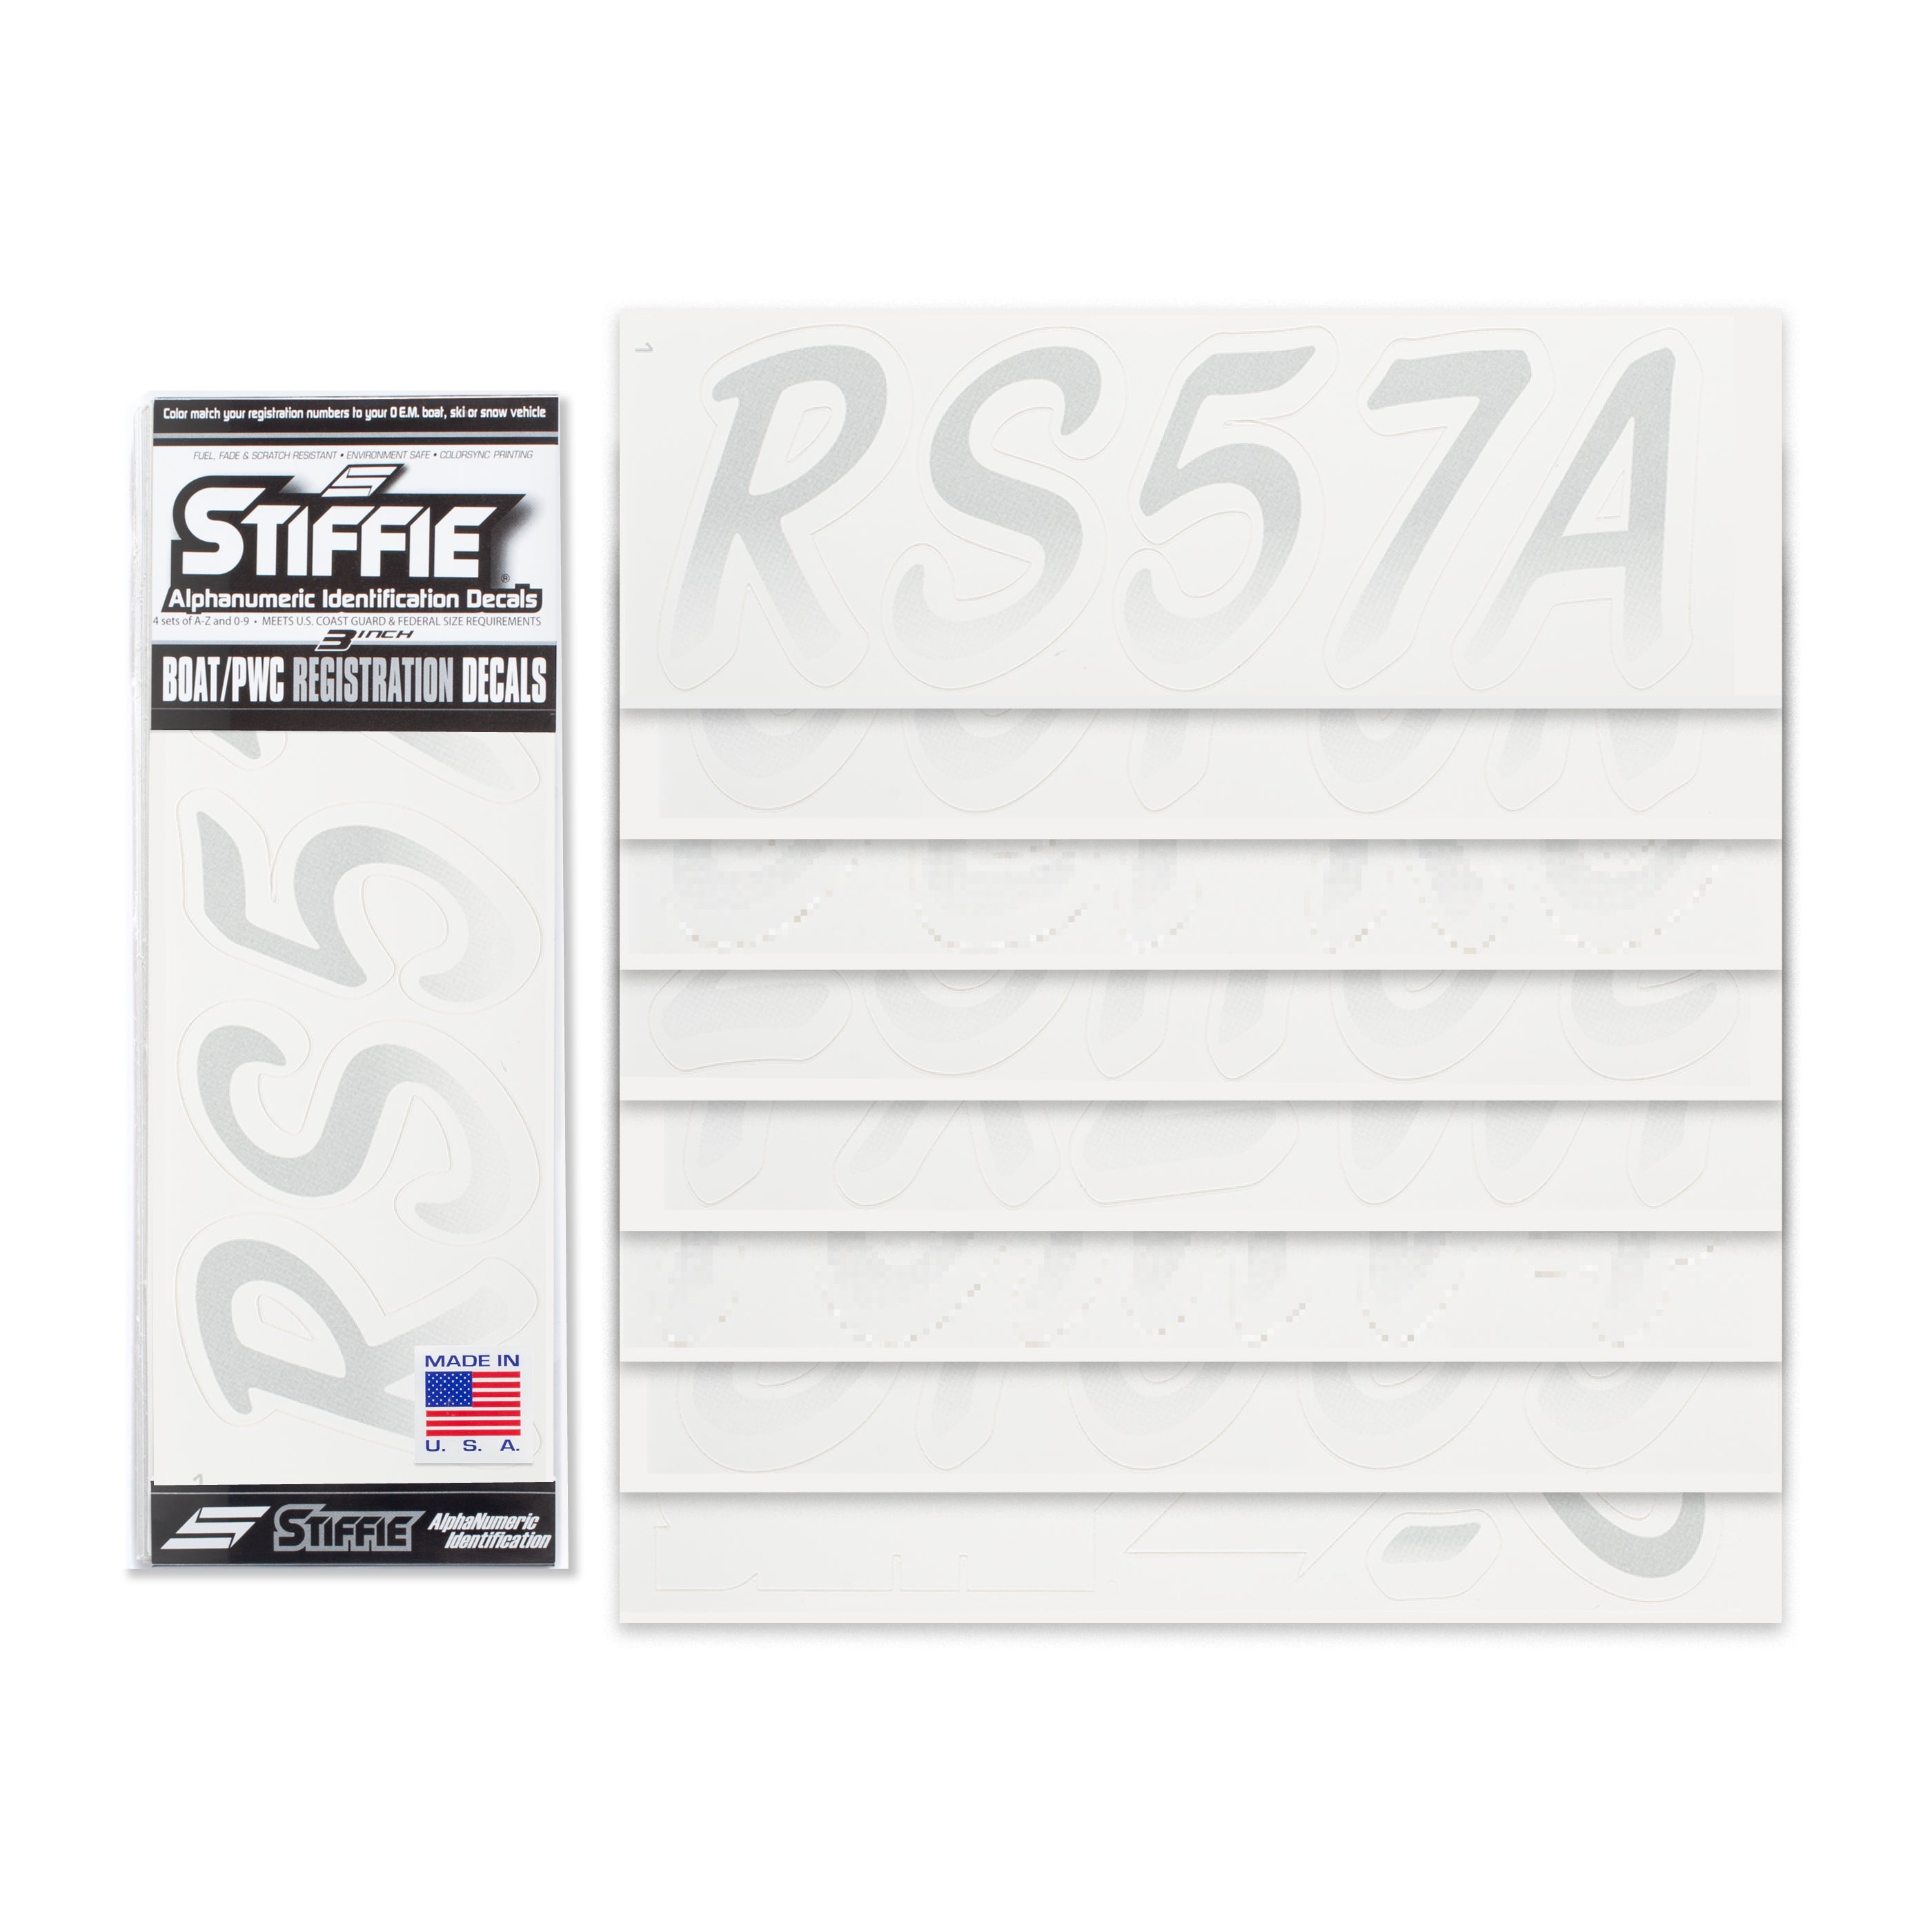 STIFFIE Whipline Silver/White 3" Alpha-Numeric Registration Identification Numbers Stickers Decals for Boats & Personal Watercraft